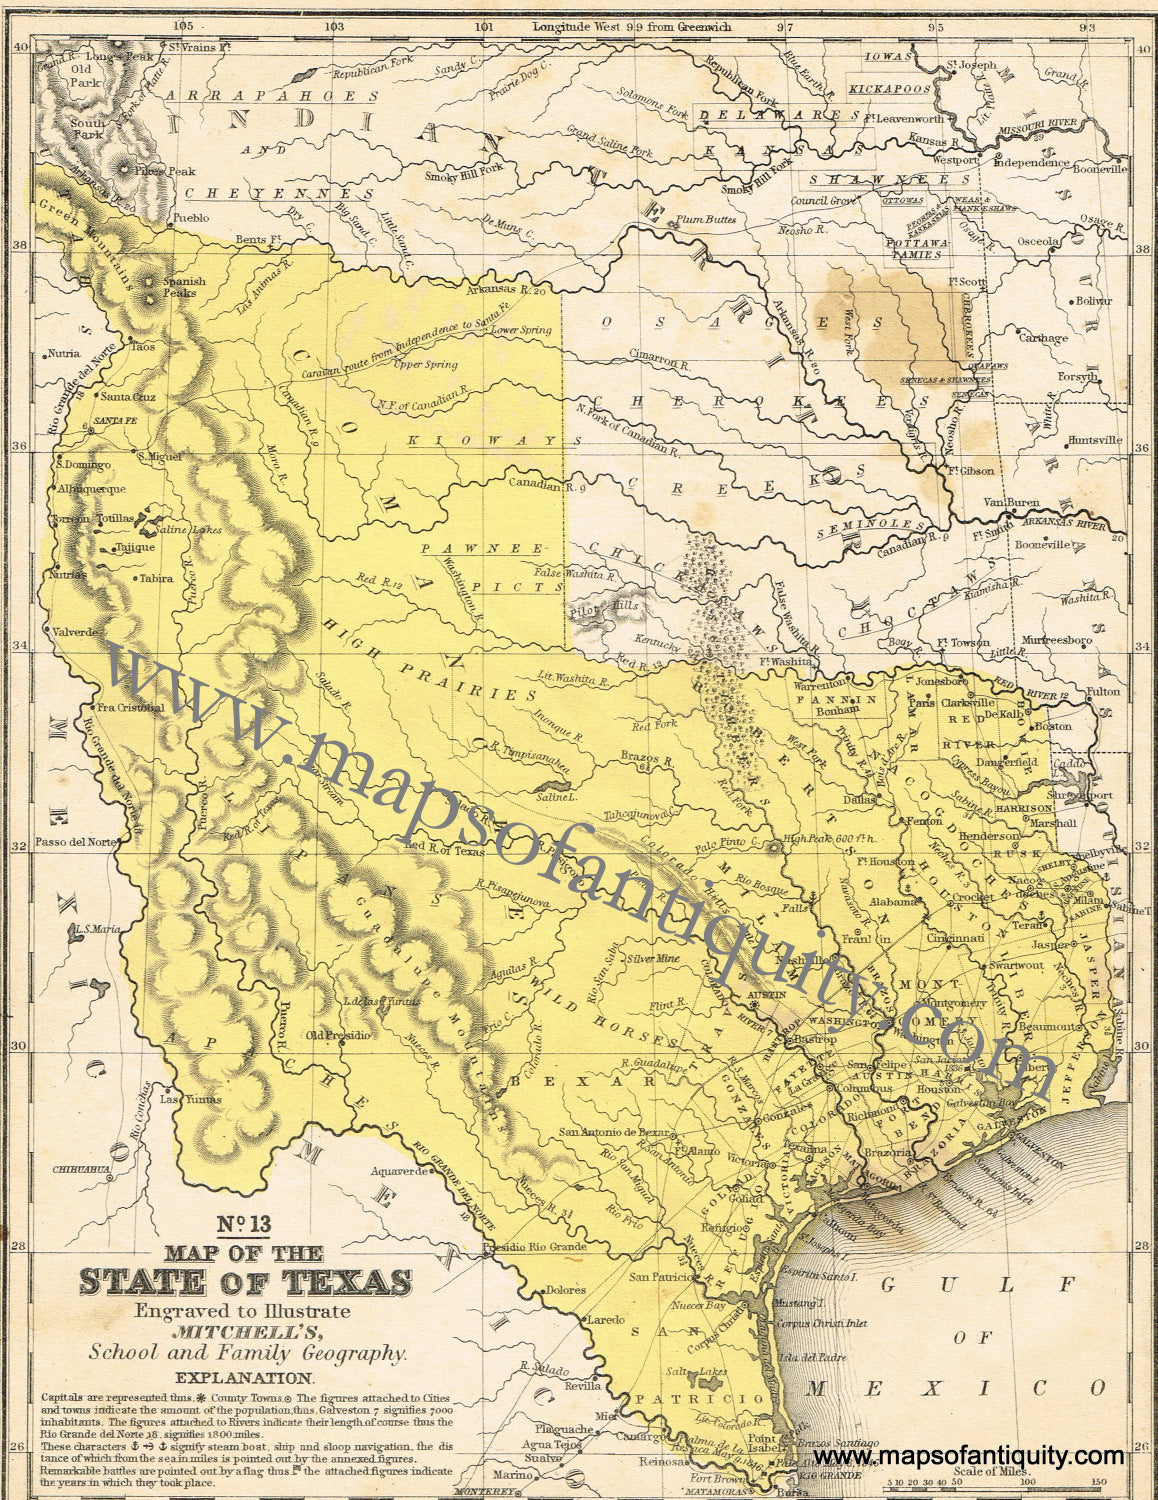 Antique-Hand-Colored-Map-No.-13-Map-of-the-State-of-Texas-**********-United-States-South-1846-Mitchell-Maps-Of-Antiquity